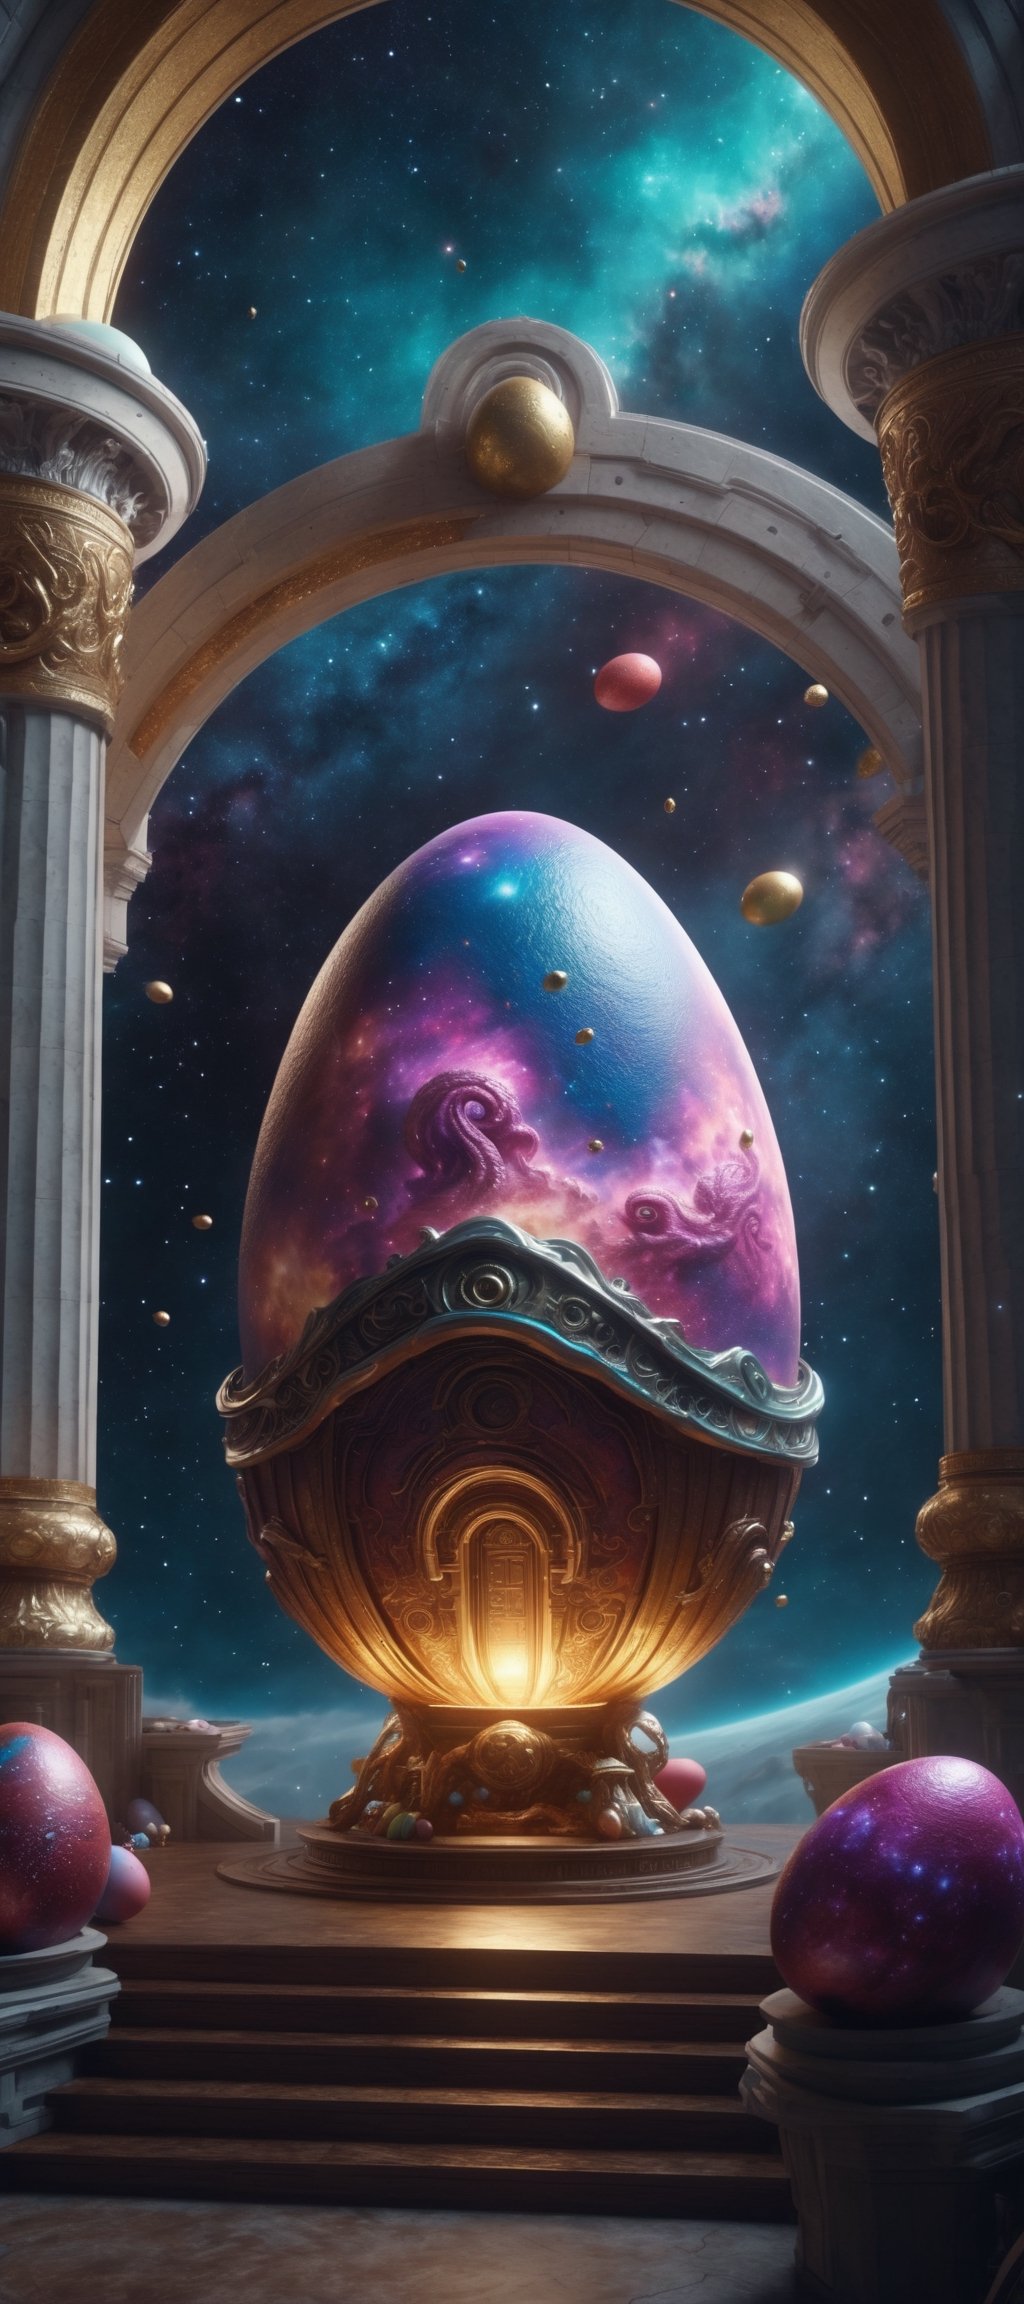 (Masterpiece),best quality,8k,hd,fantasy,easter egg floating in space,nebula,there is a space kraken inside the easter egg,
Architectural100